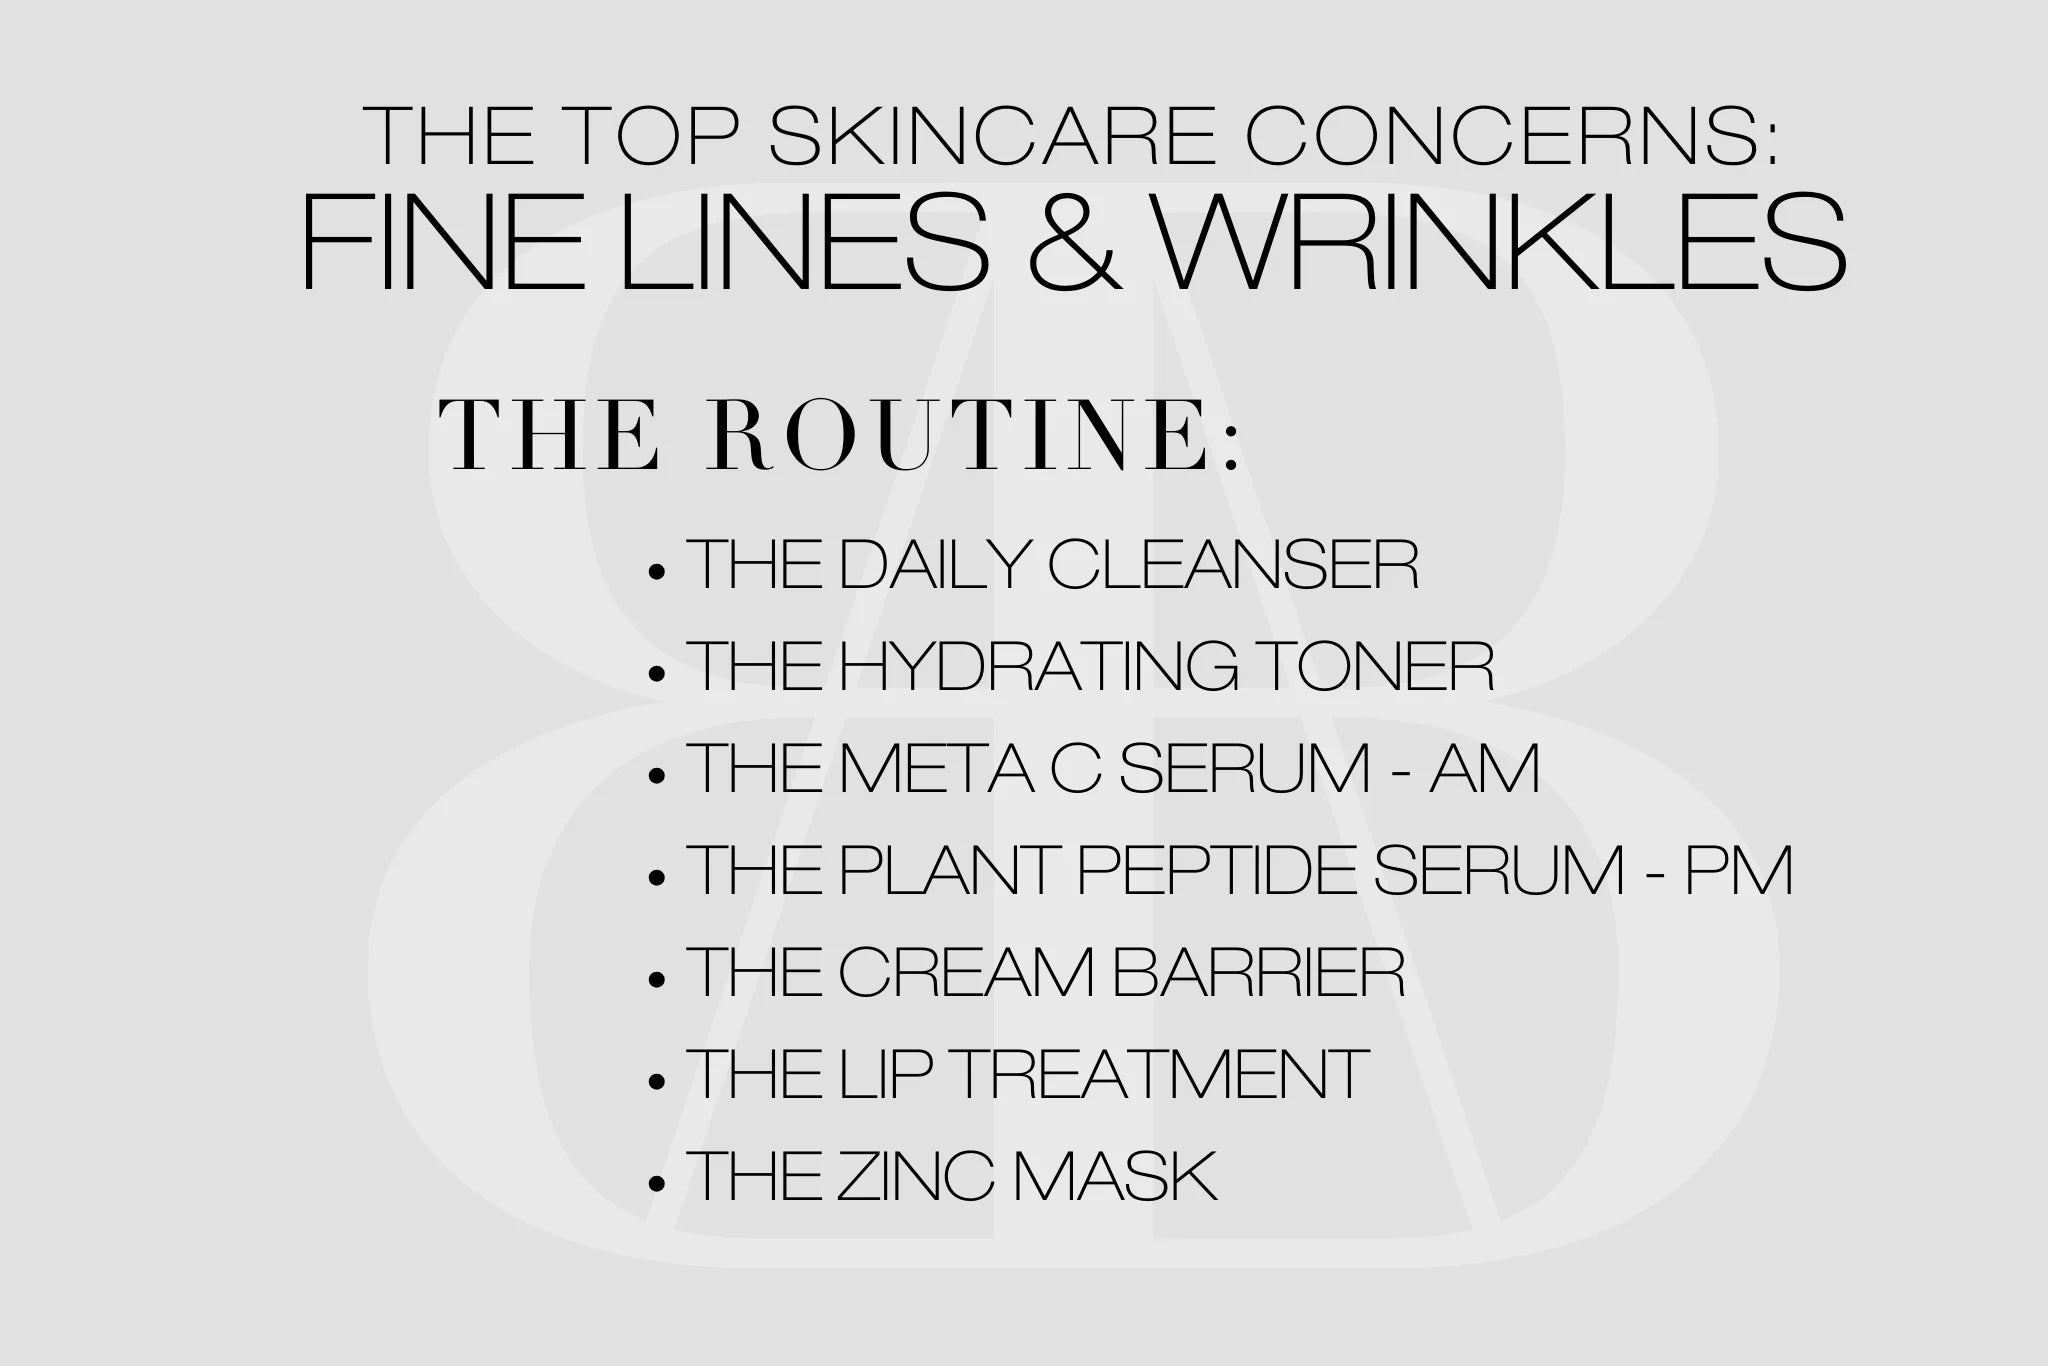 THE ROUNTINE: FINE LINES & WRINKLES